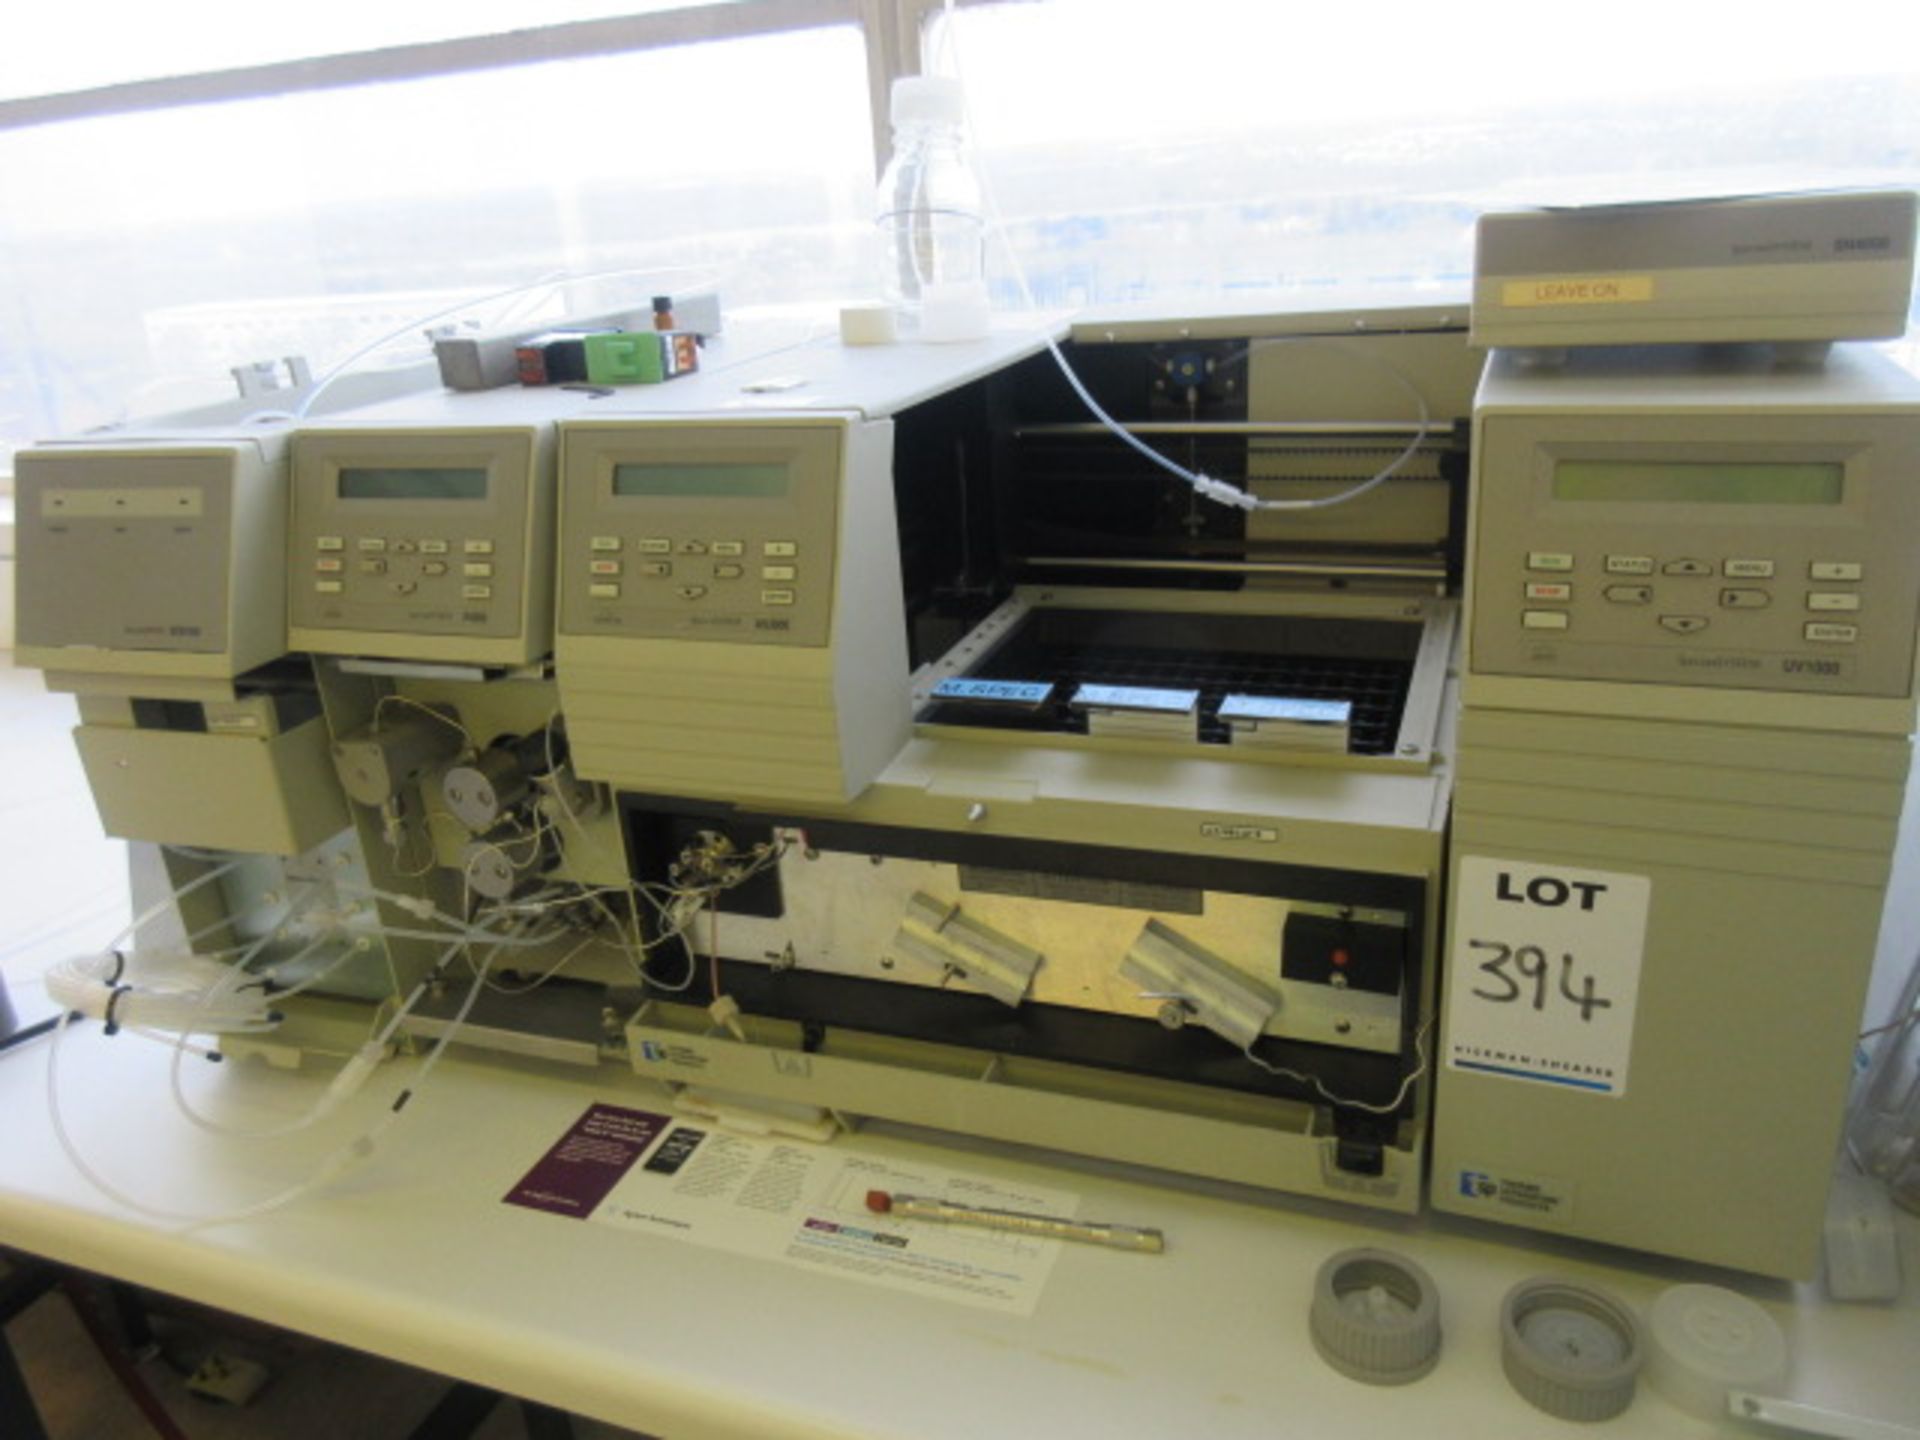 SPECTRA SYSTEM AS 3000 LIQUID SAMPLER WITH SCM 1000 & P4000 UNITS